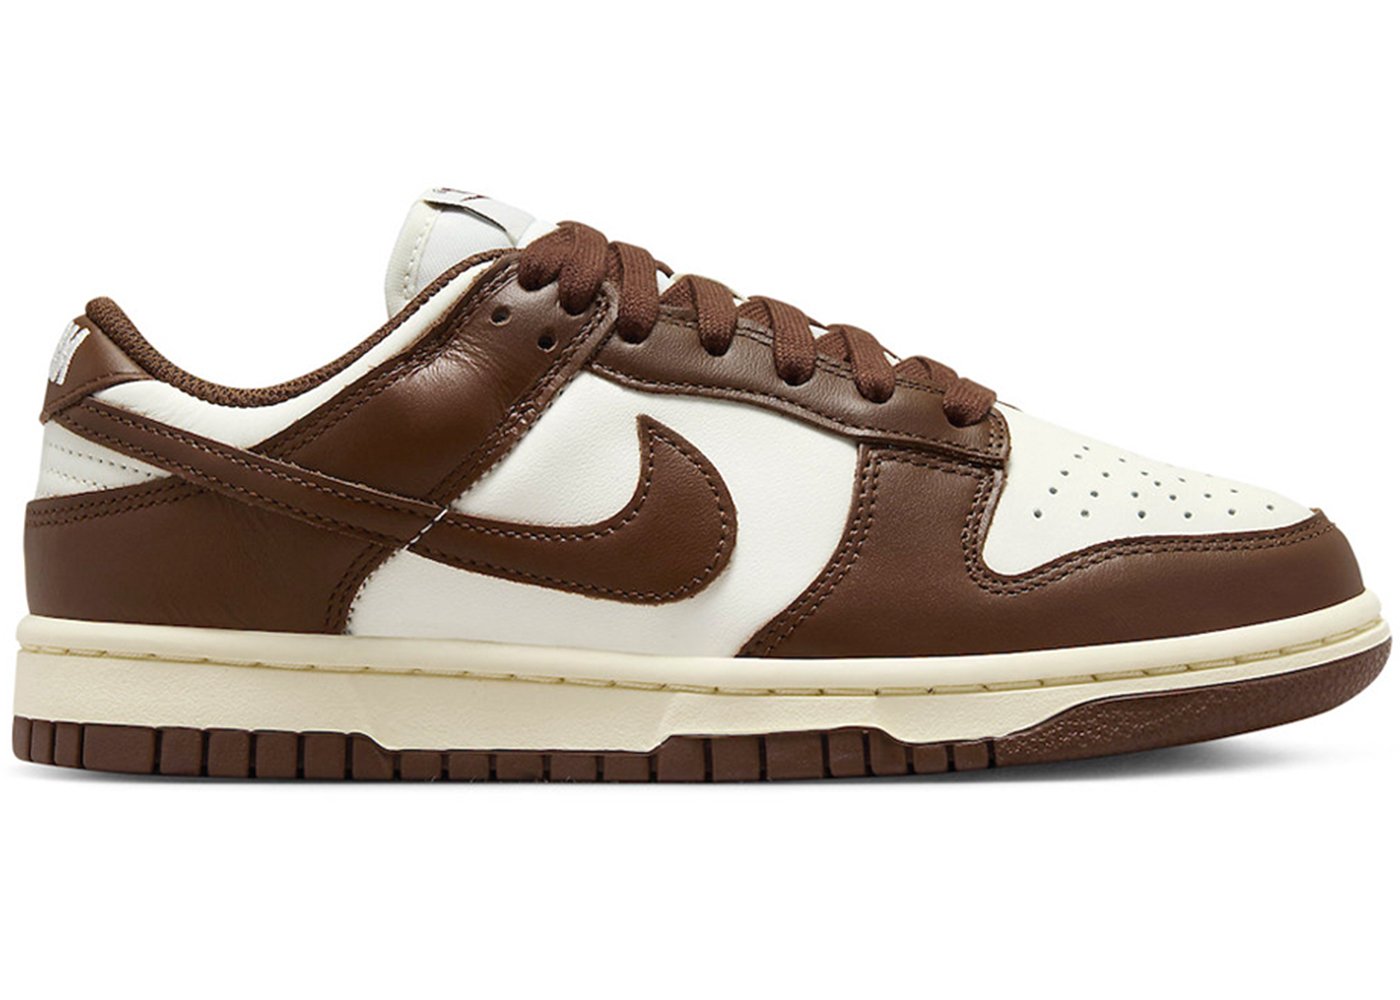 Dunk Low "Cacao Wow" W